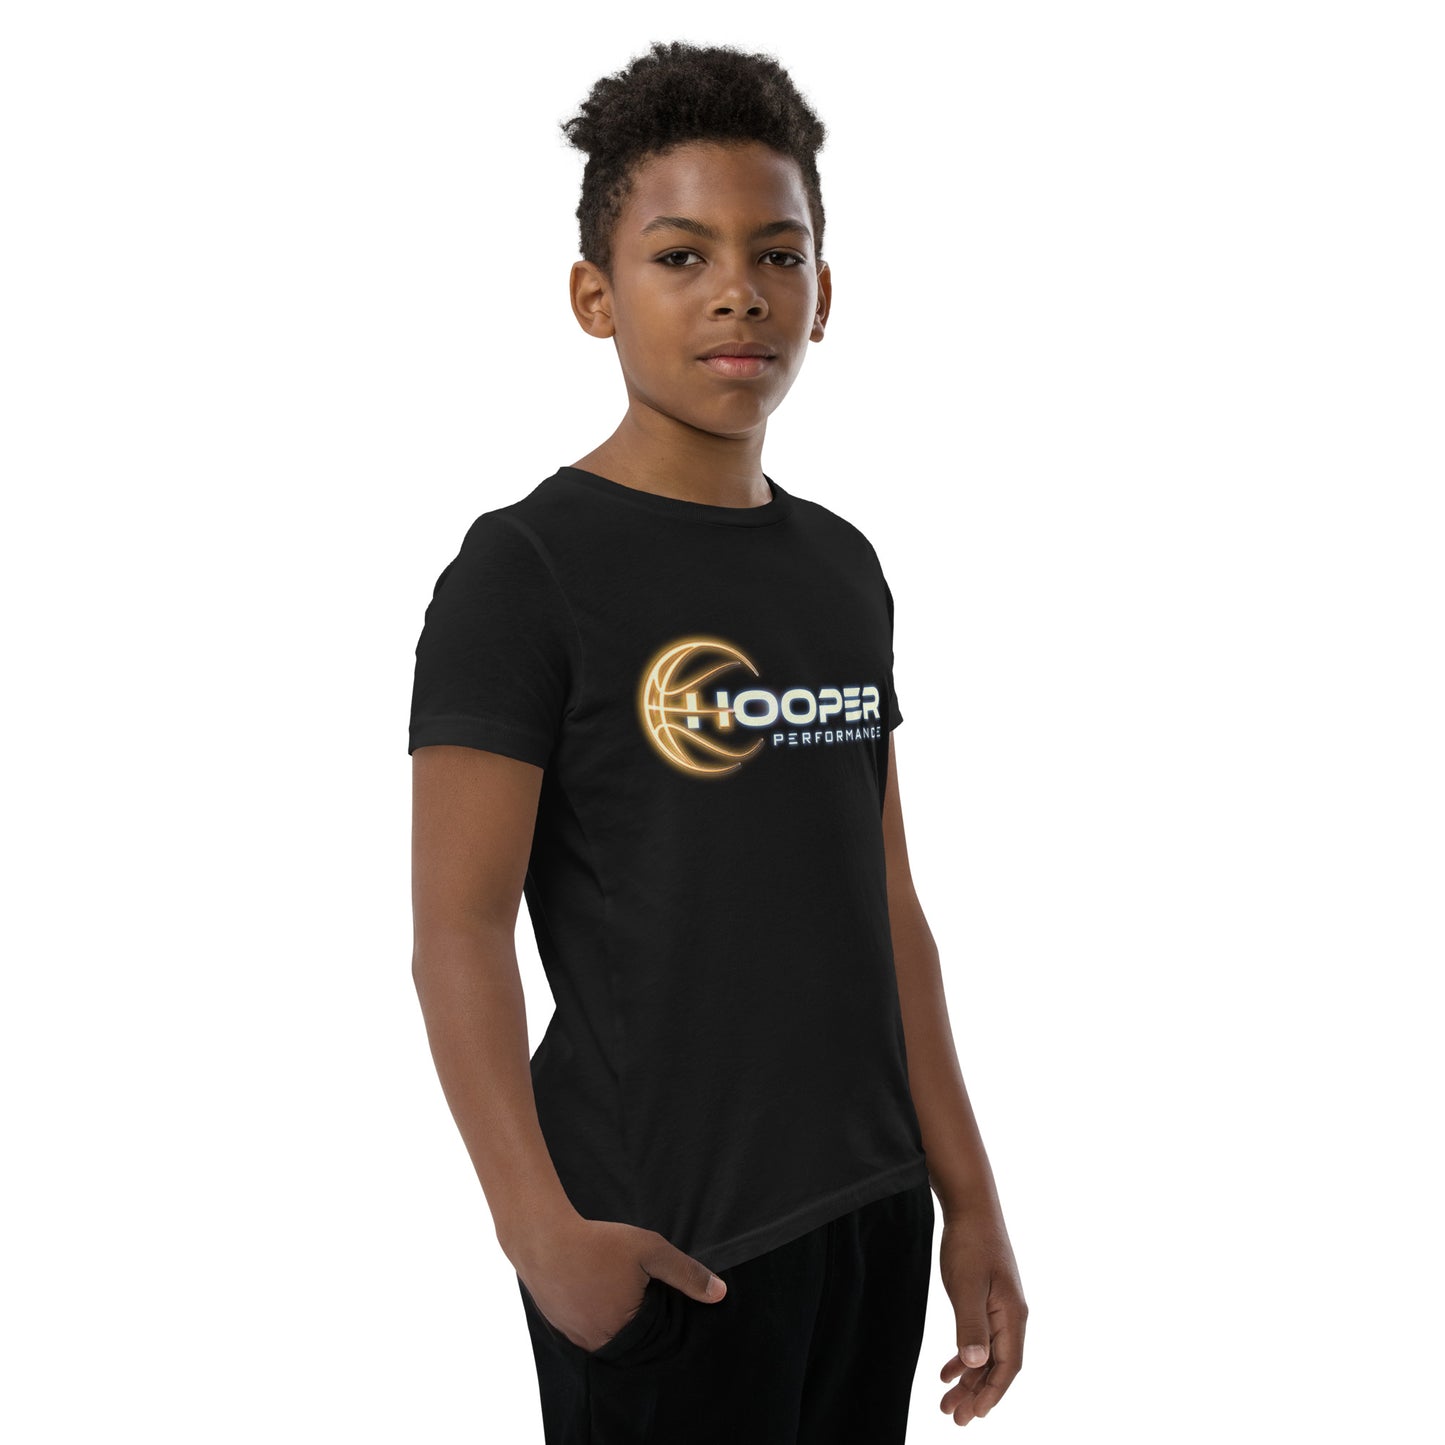 Hooper performance Gold color Youth Short Sleeve T-Shirt-Best for Kids